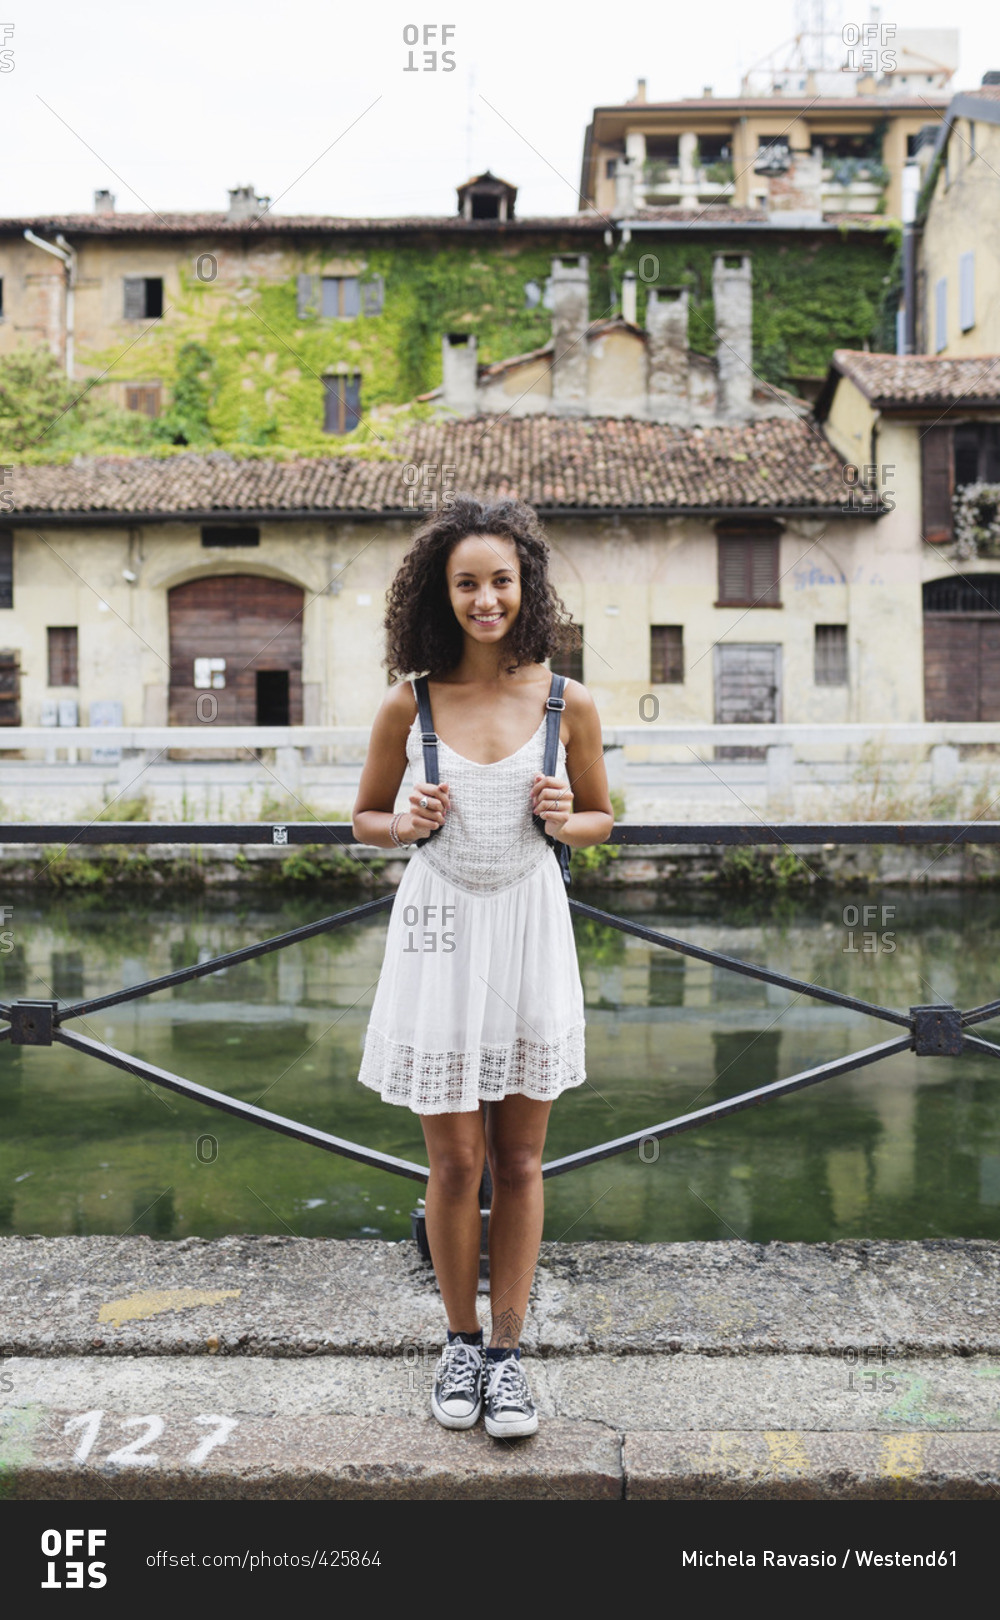 Italy- Milan- portrait of smiling young woman with backpack wearing white summer dress